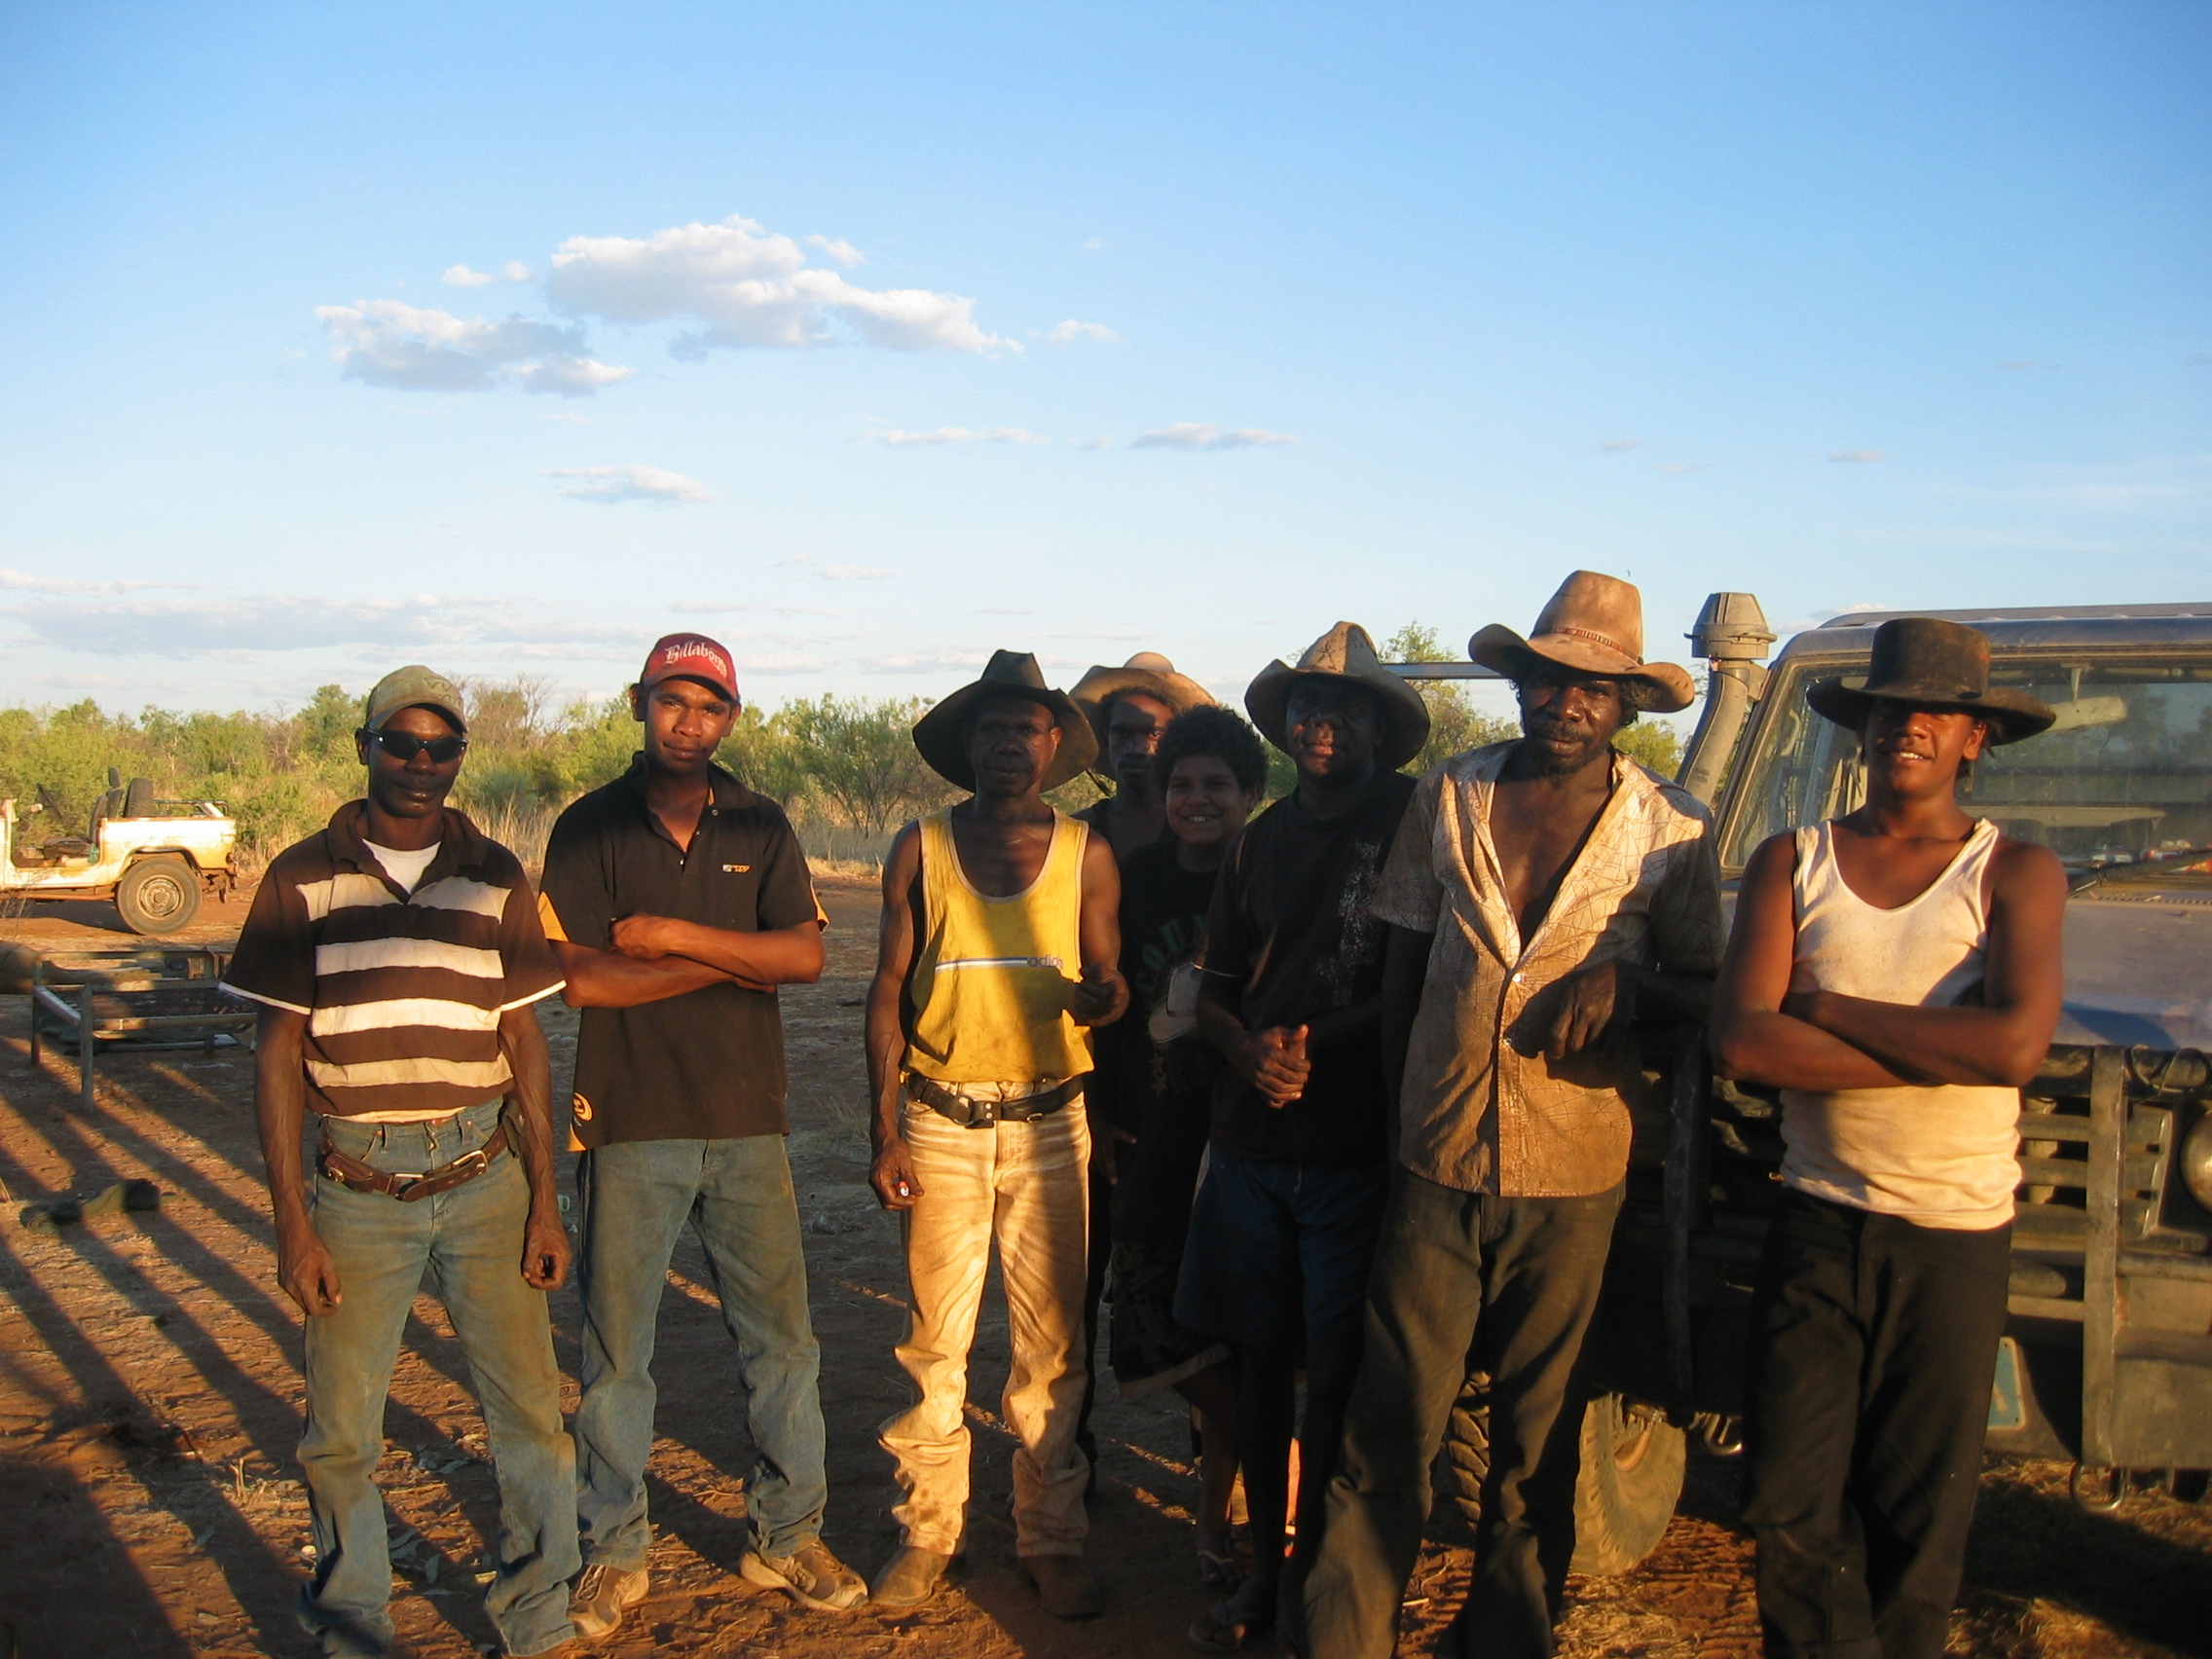 First class of the 2008 Beef Cattle Production program at Mount Pierre Station in the Kimberley